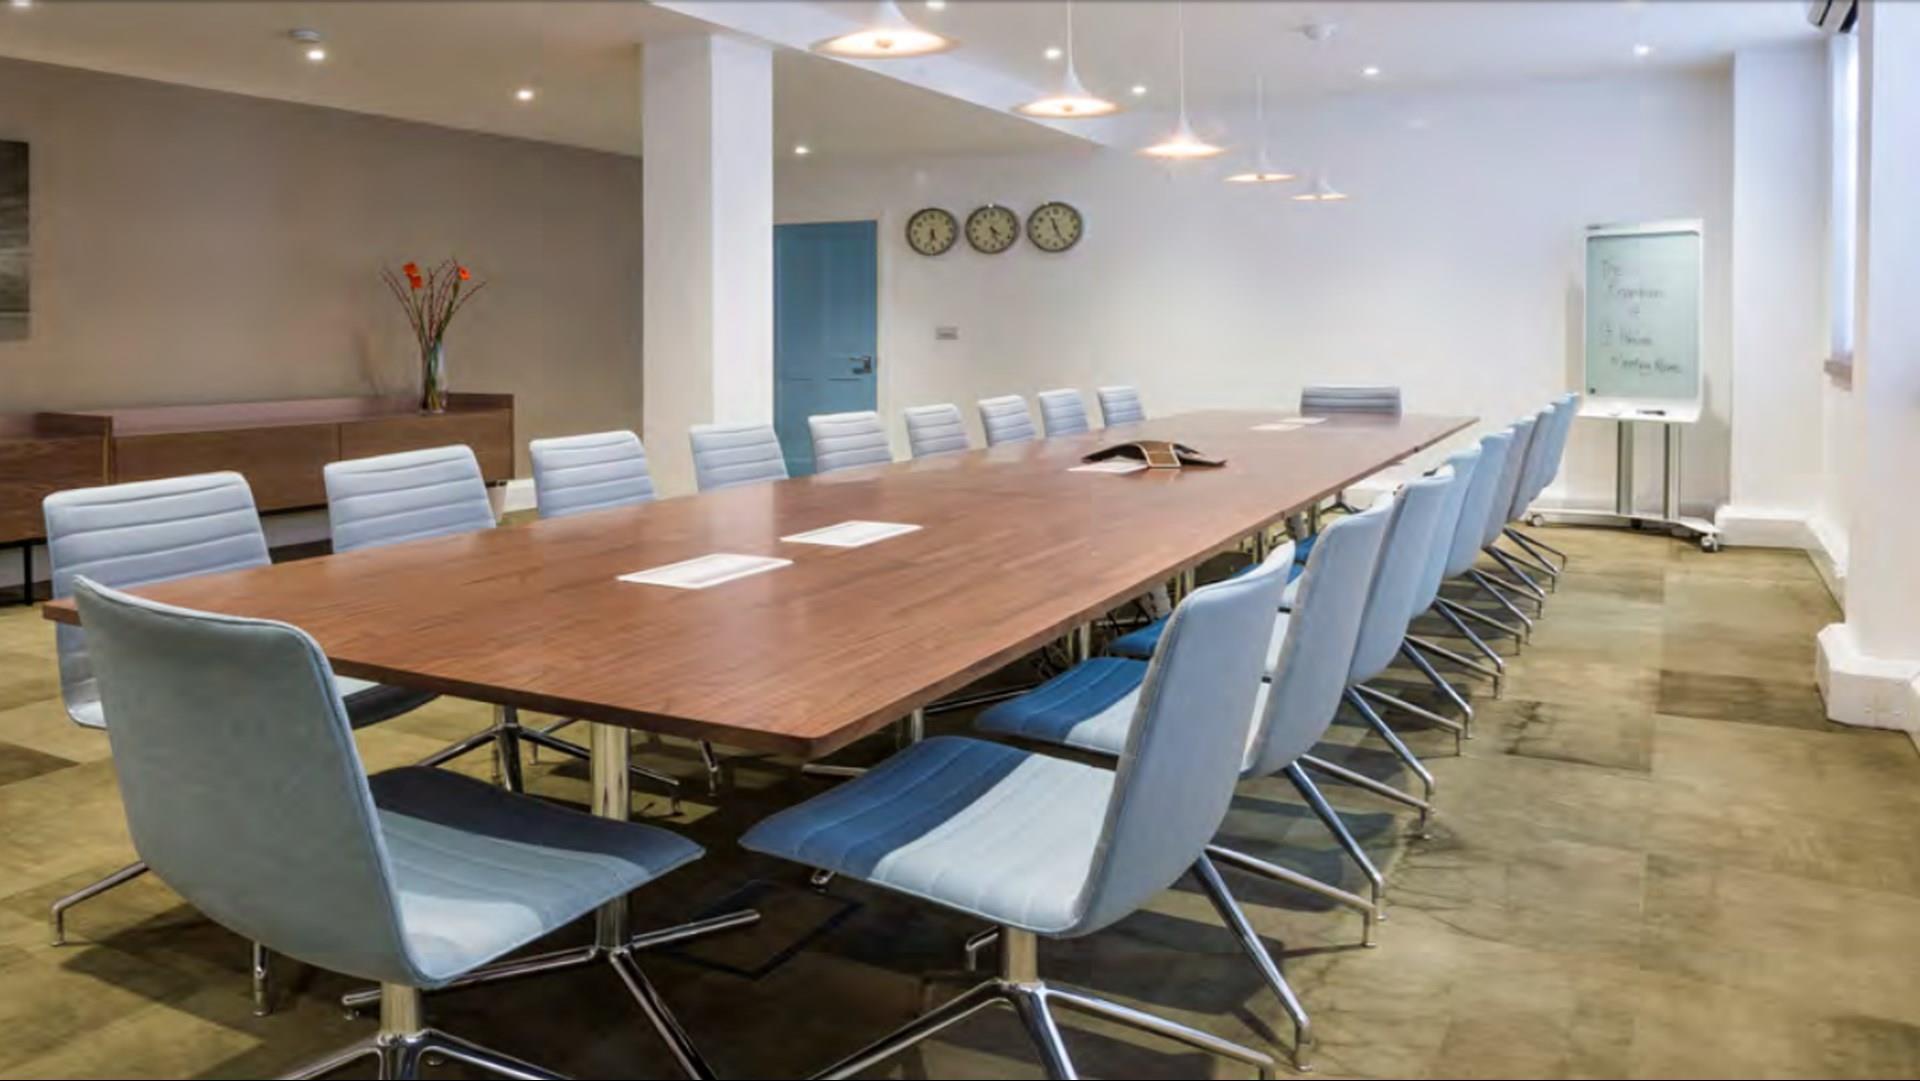 St Pancras Meeting Rooms in London, GB1